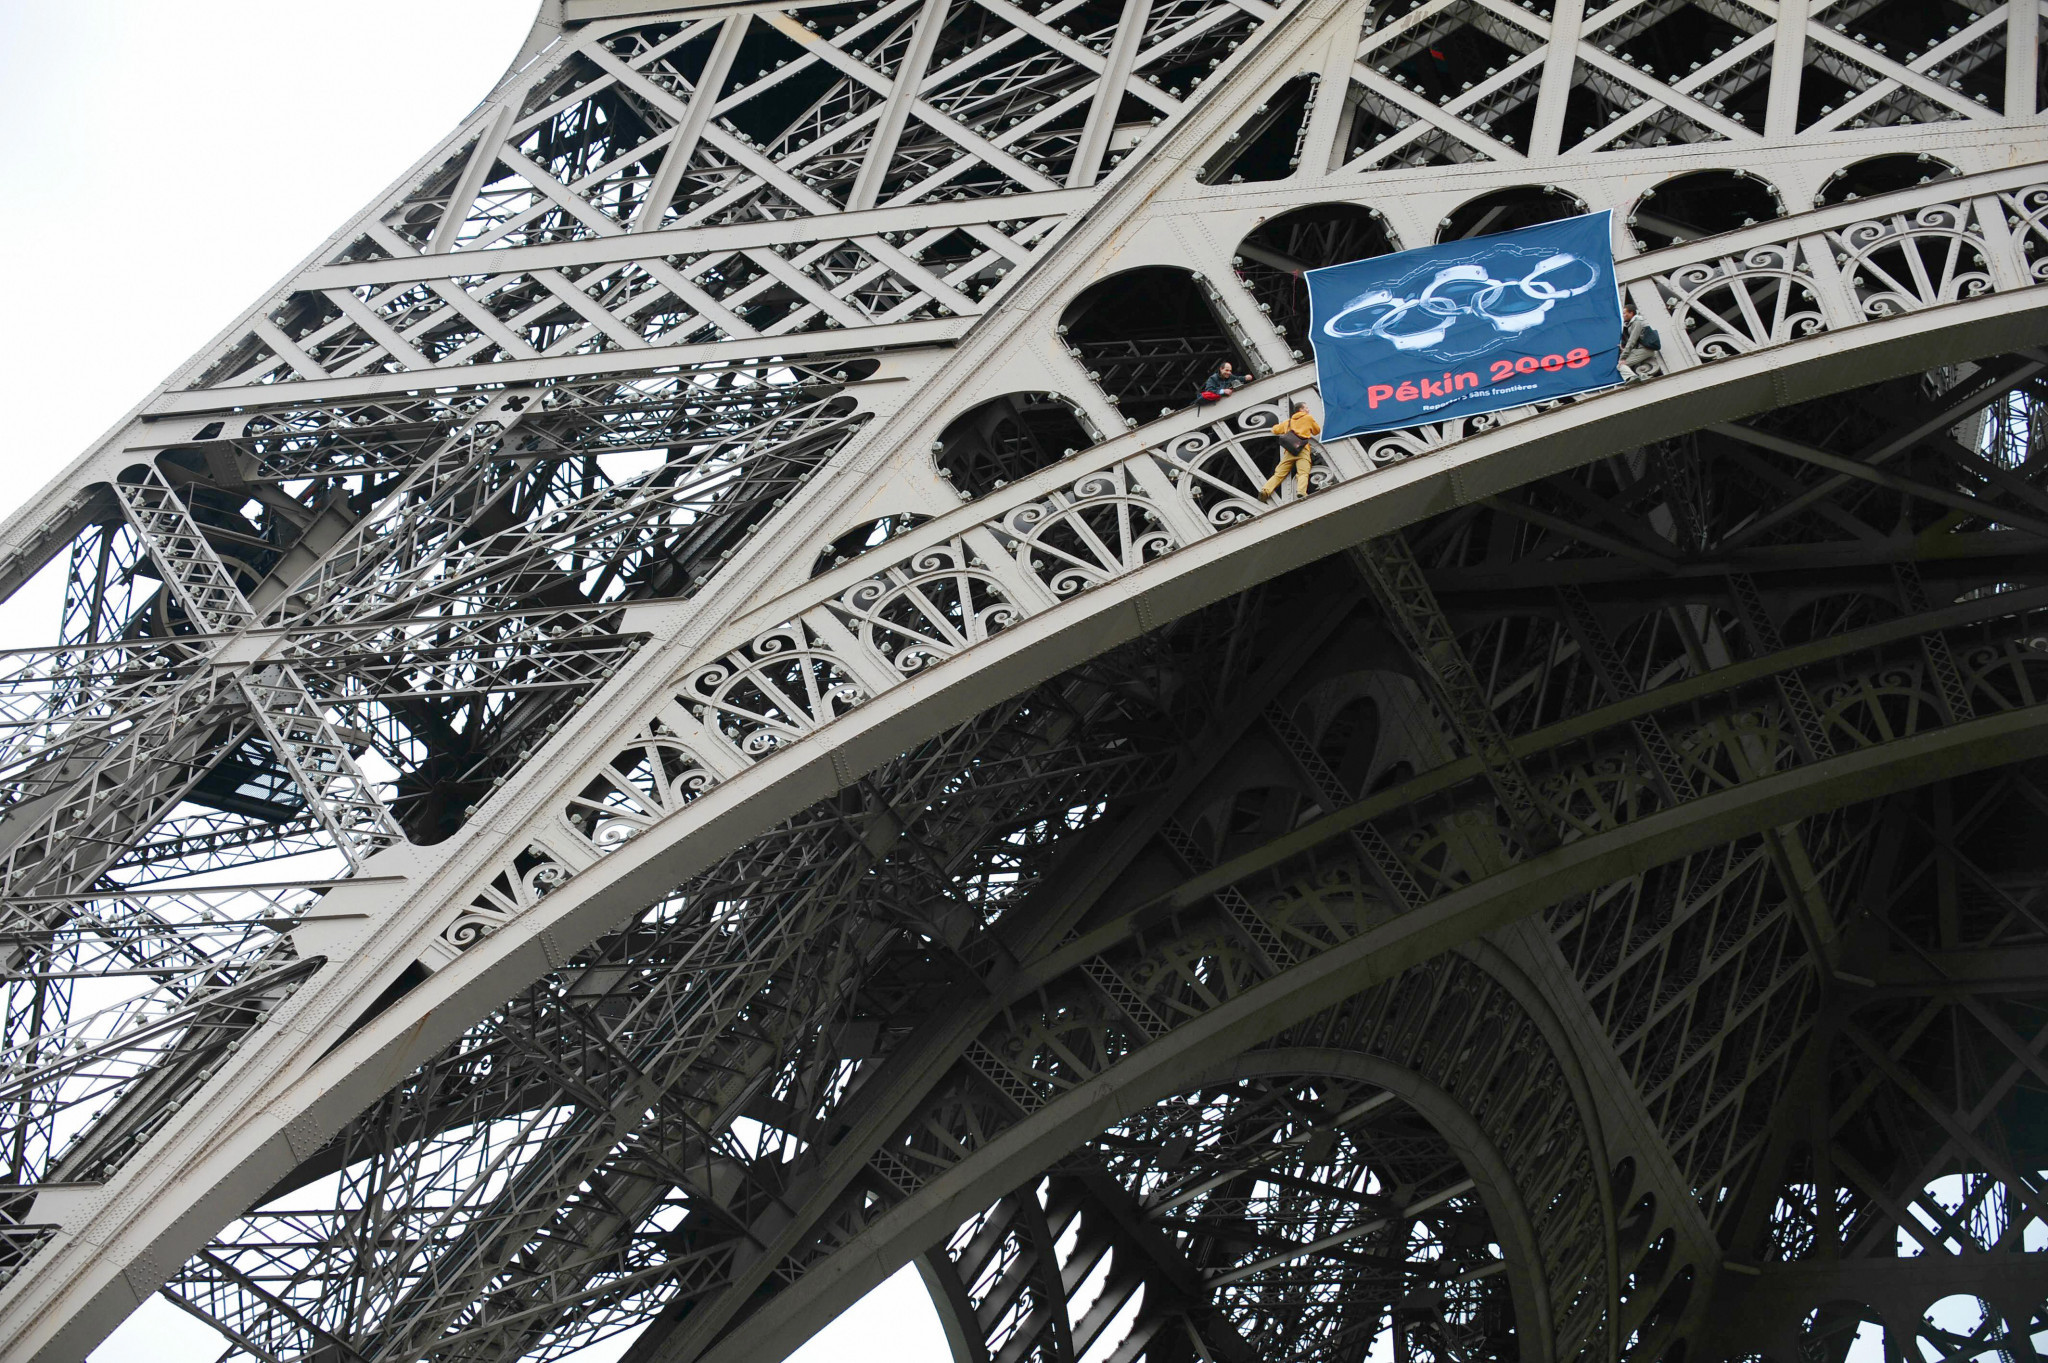 
Demonstrators scaled the Eiffel Tower to protest against human rights abuses in China when the Olympic Flame last visited Paris in 2008 ©Getty Images

